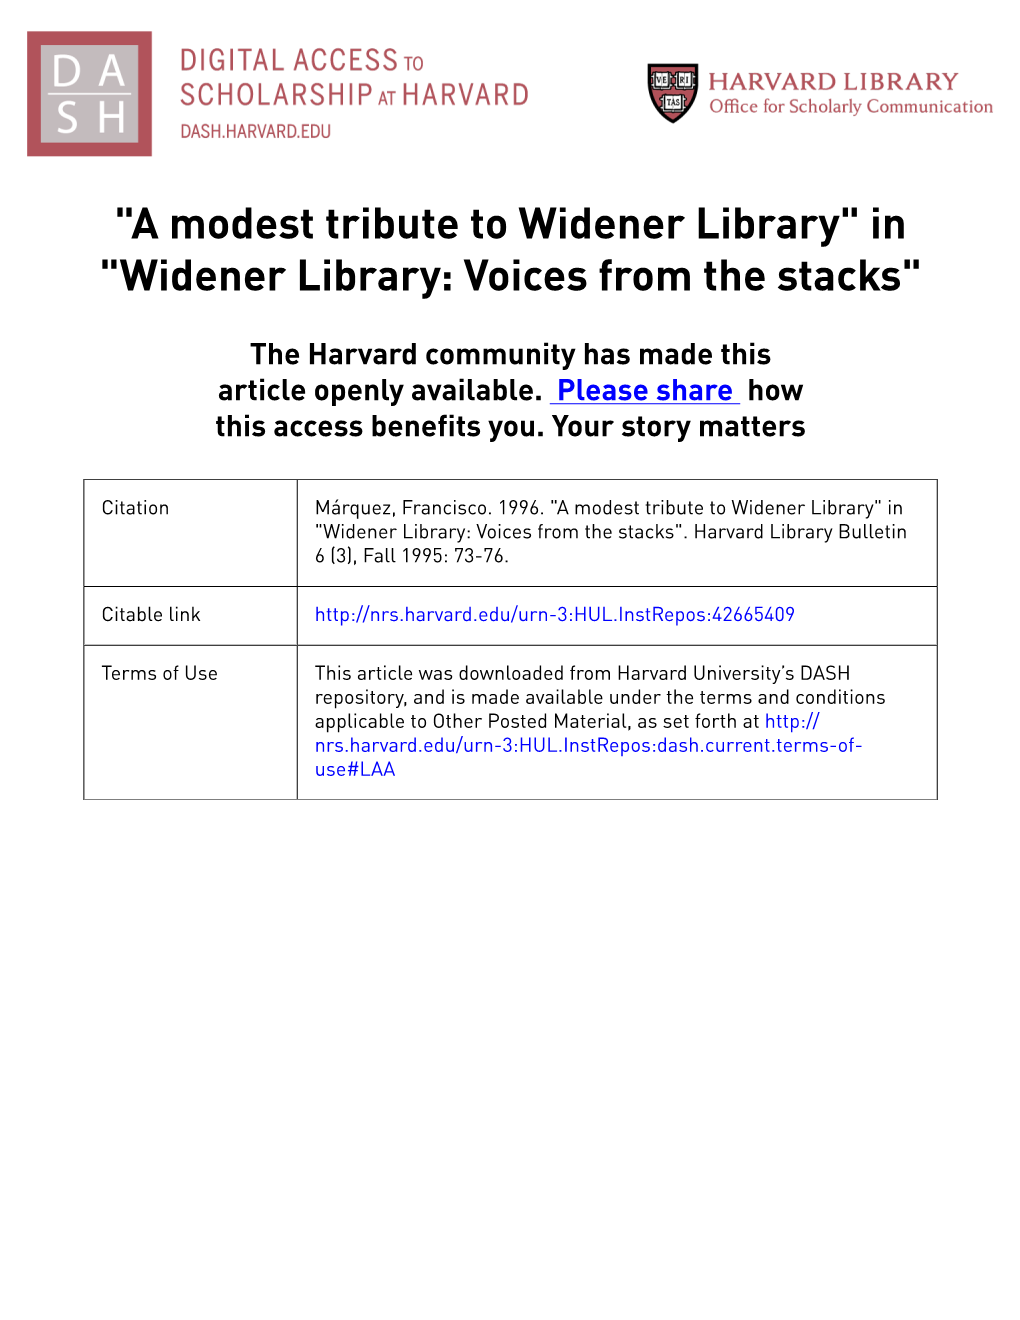 "A Modest Tribute to Widener Library" in "Widener Library: Voices from the Stacks"